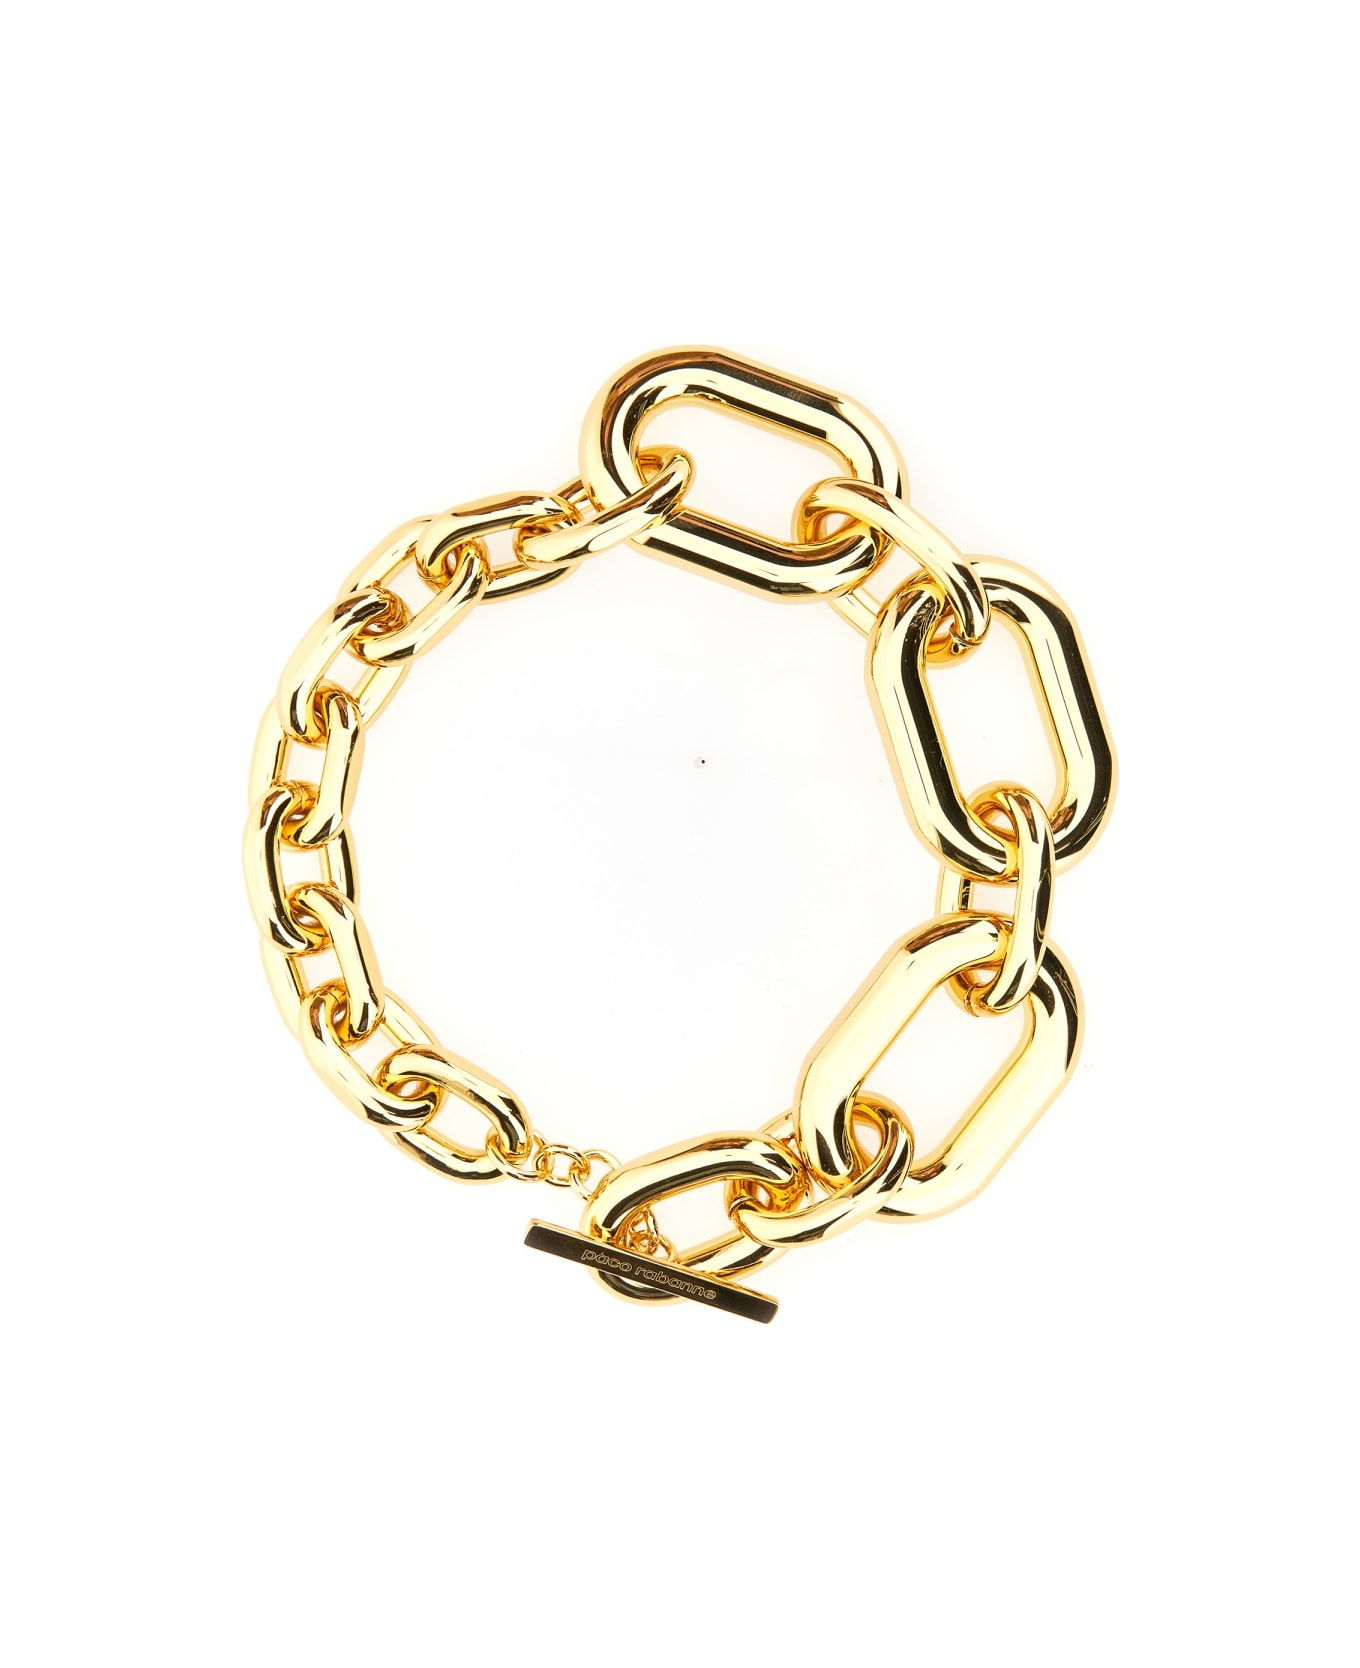 Paco Rabanne 'xl Link' Necklace - GOLD ネックレス